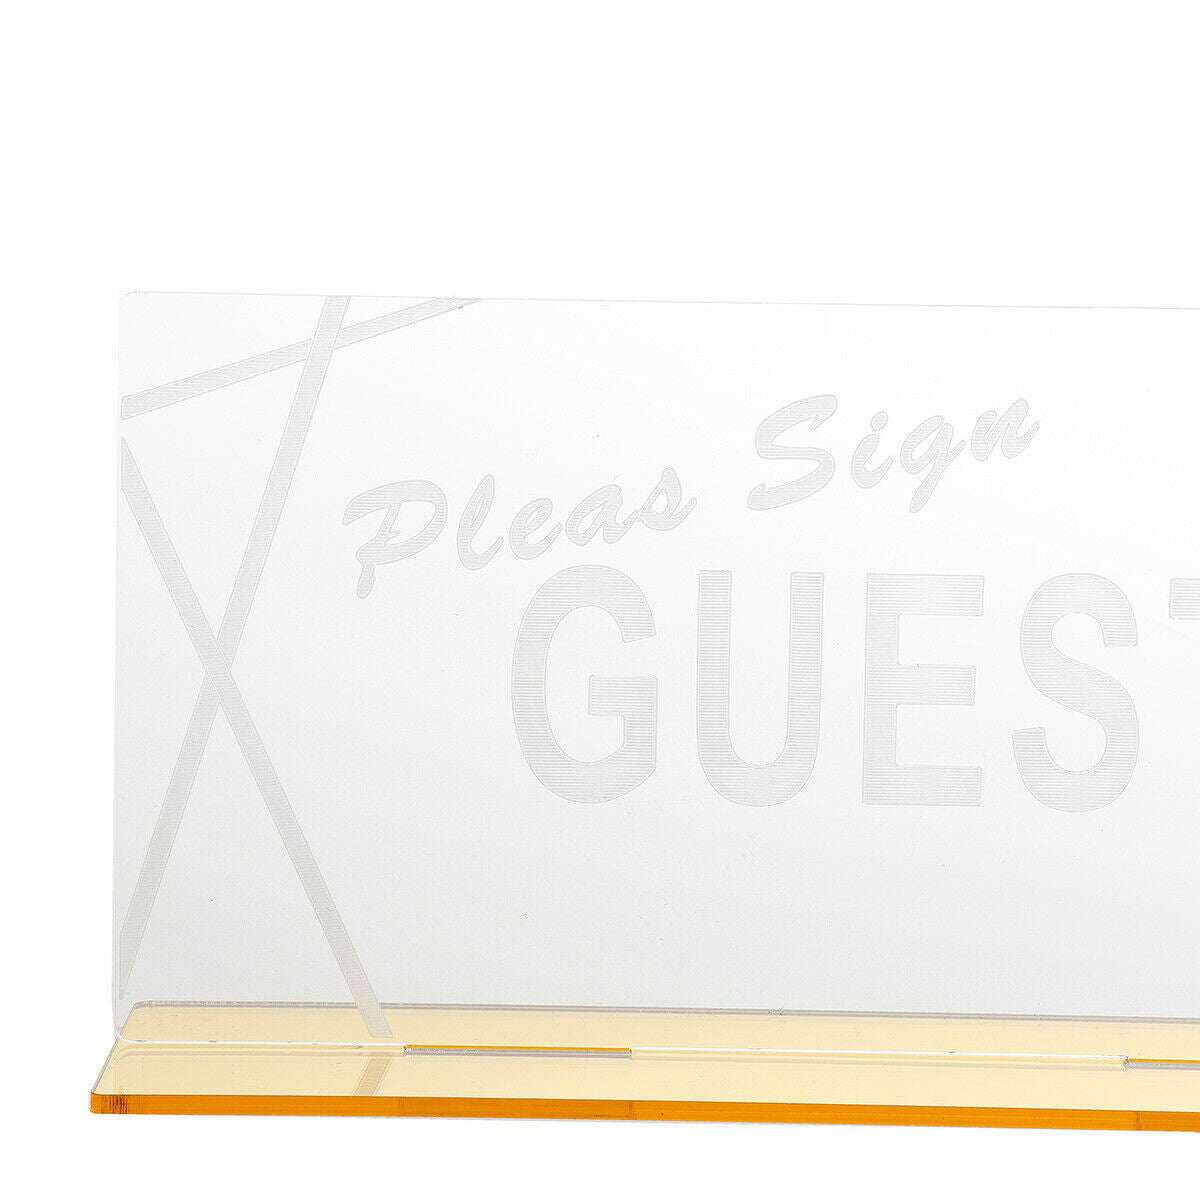 Acrylic Guest Book Sign W/ Timber Base Wedding Table Guestbook Sign   ï¼ï¼ @S  â˜ª